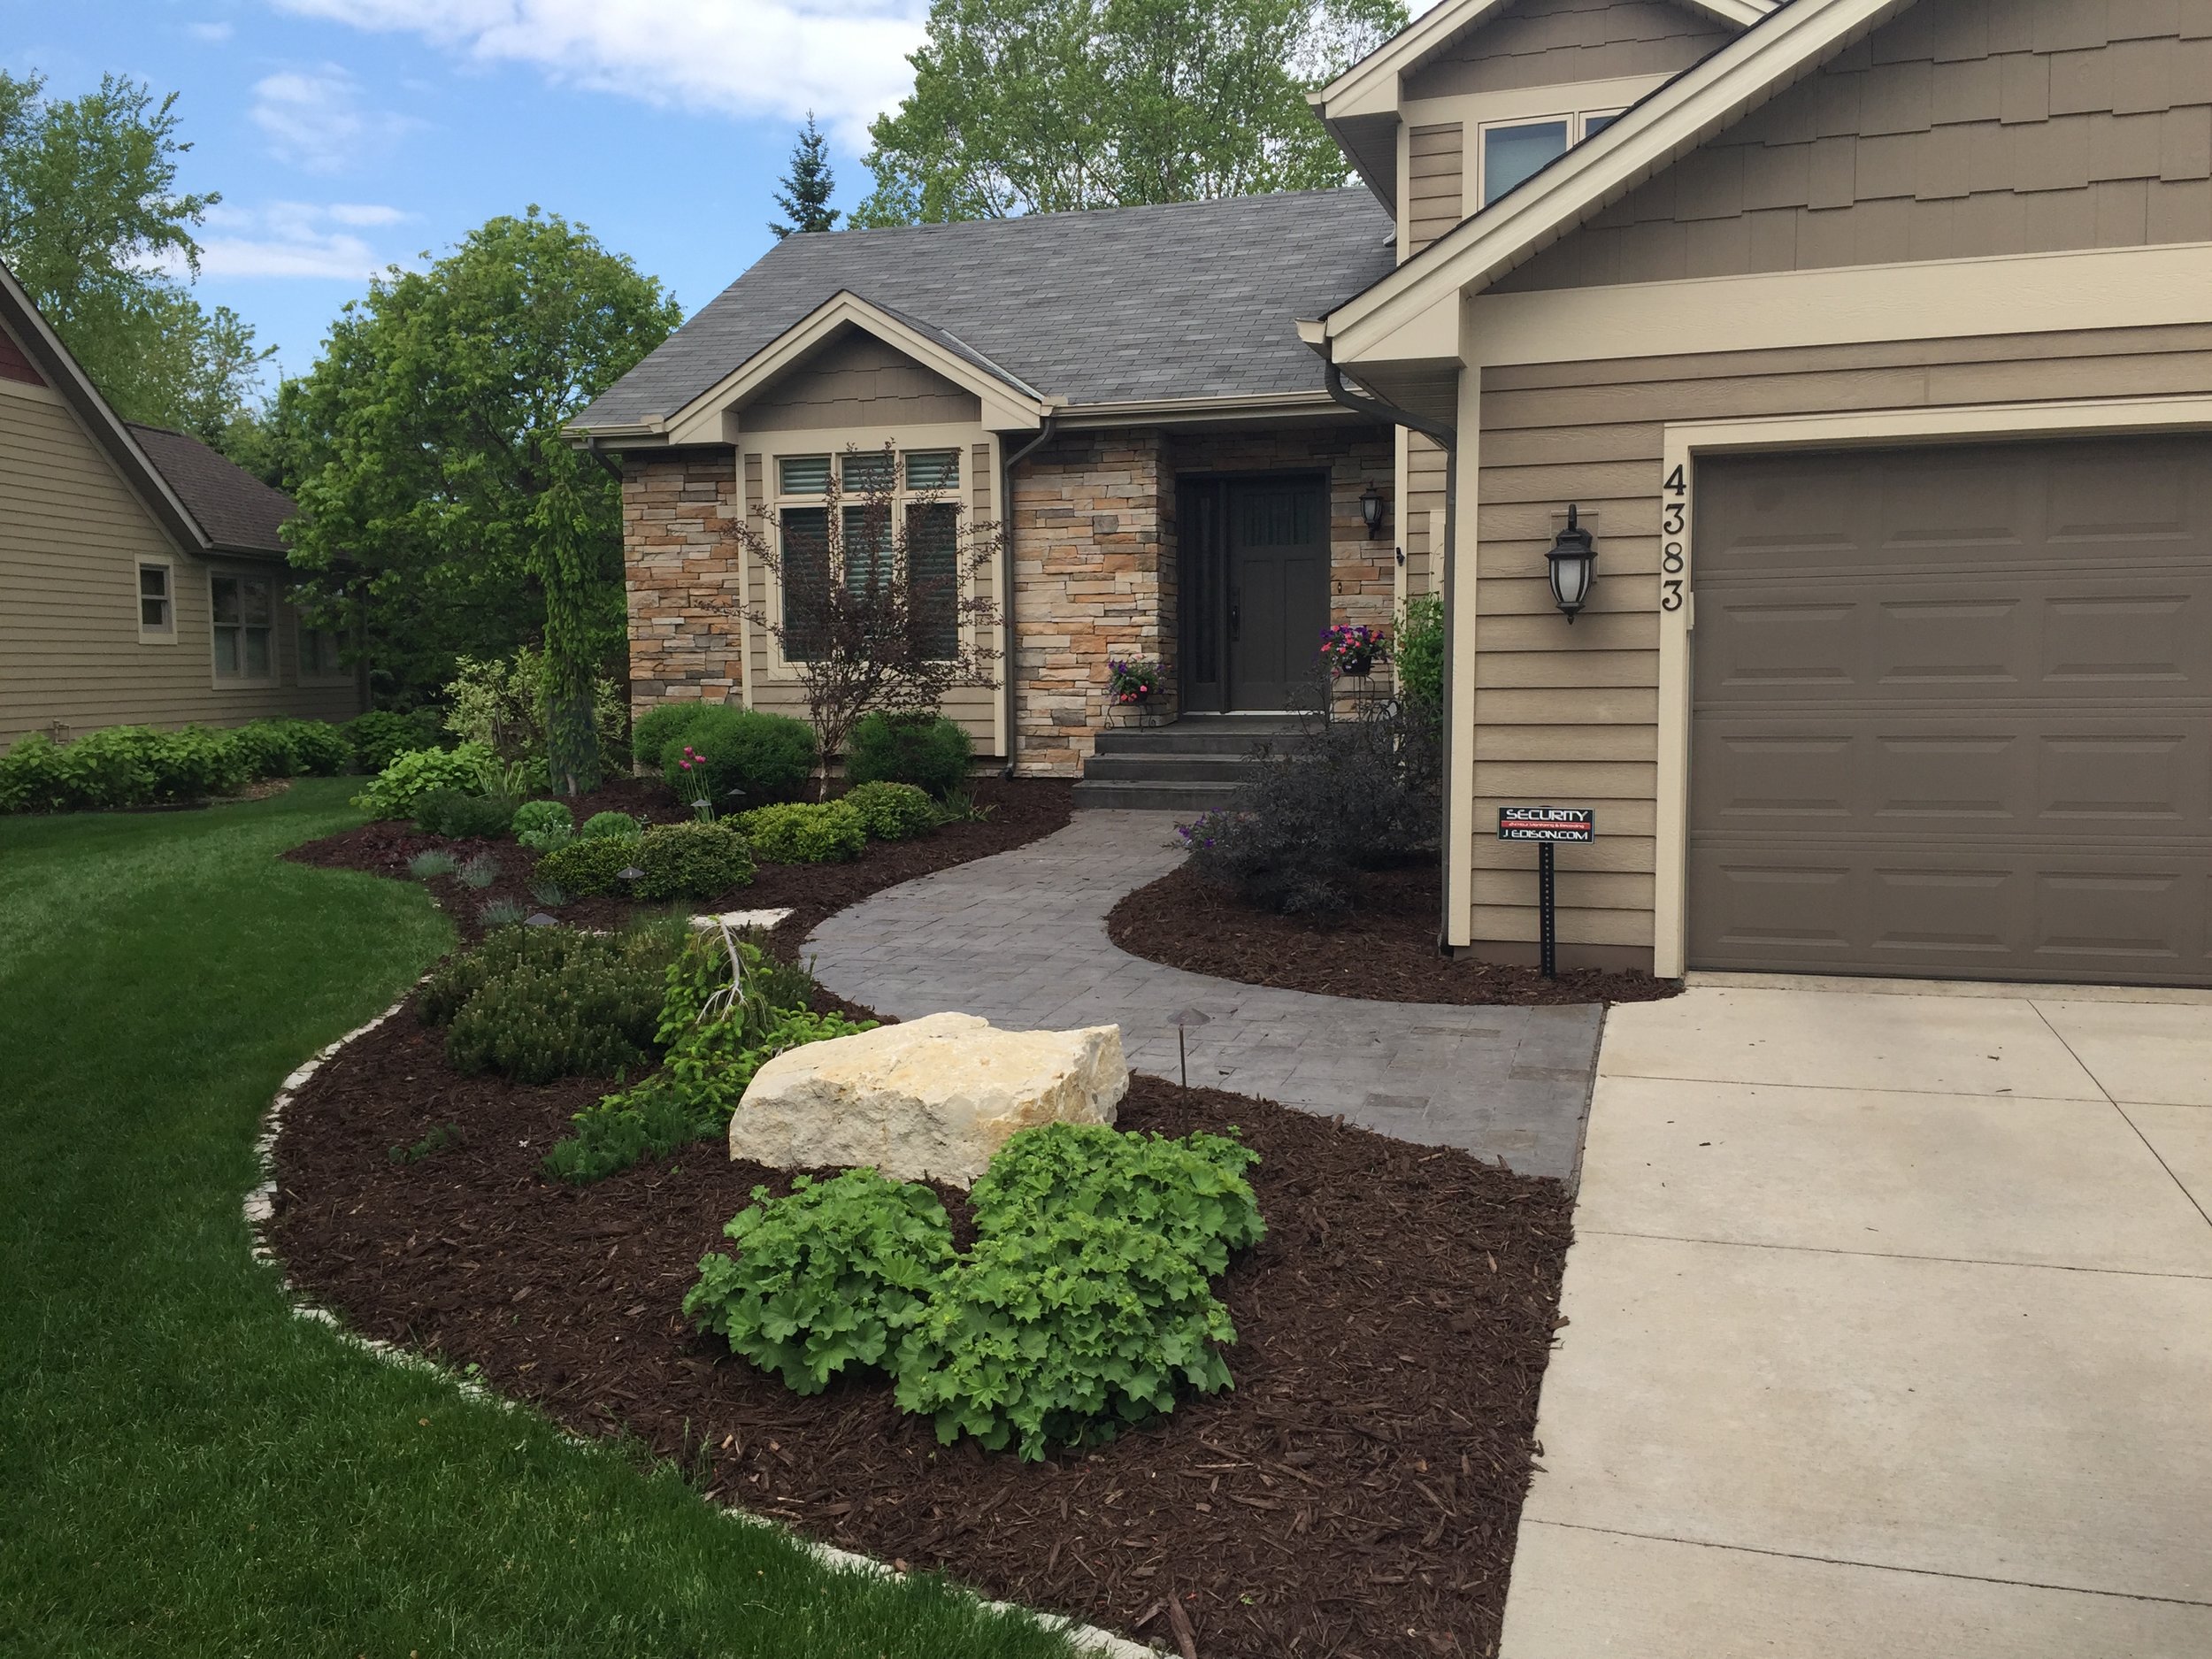  QUALITY SERVICE FOR ALL SEASONS   View Landscape  